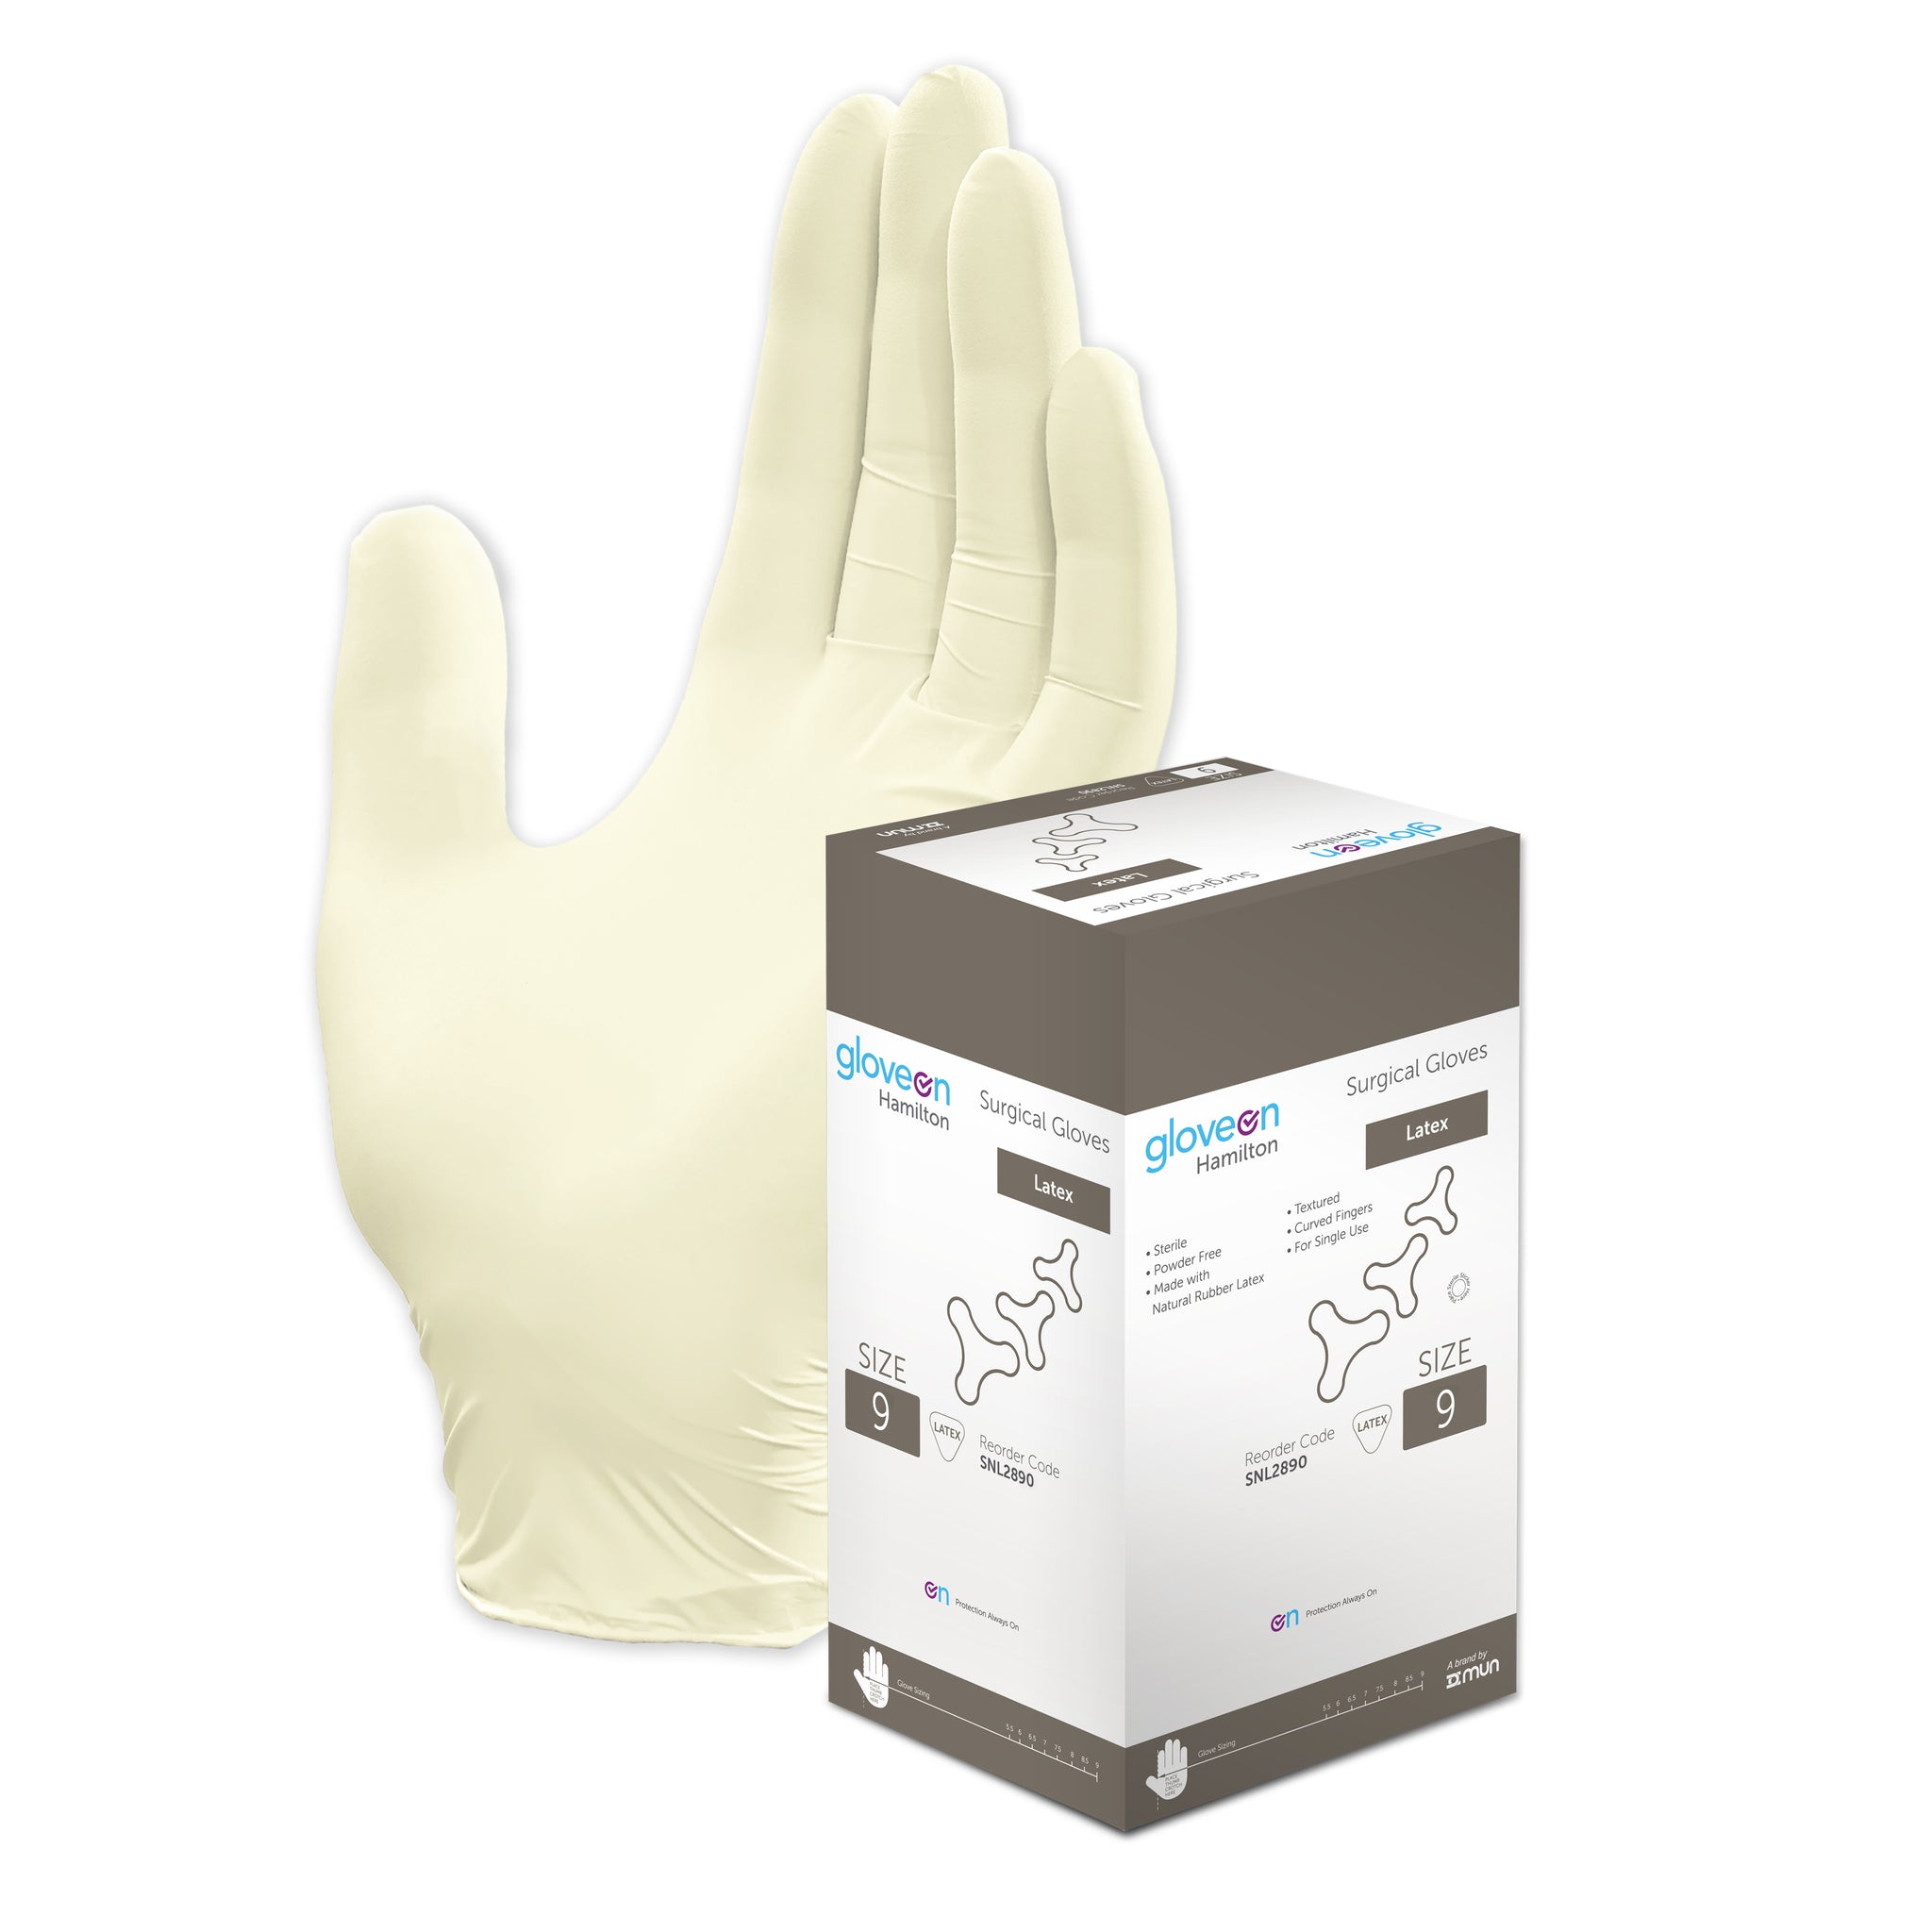 Latex, Powder Free, Textured, Curved Fingers, Sterile, Natural Colour - Box of 100, 9